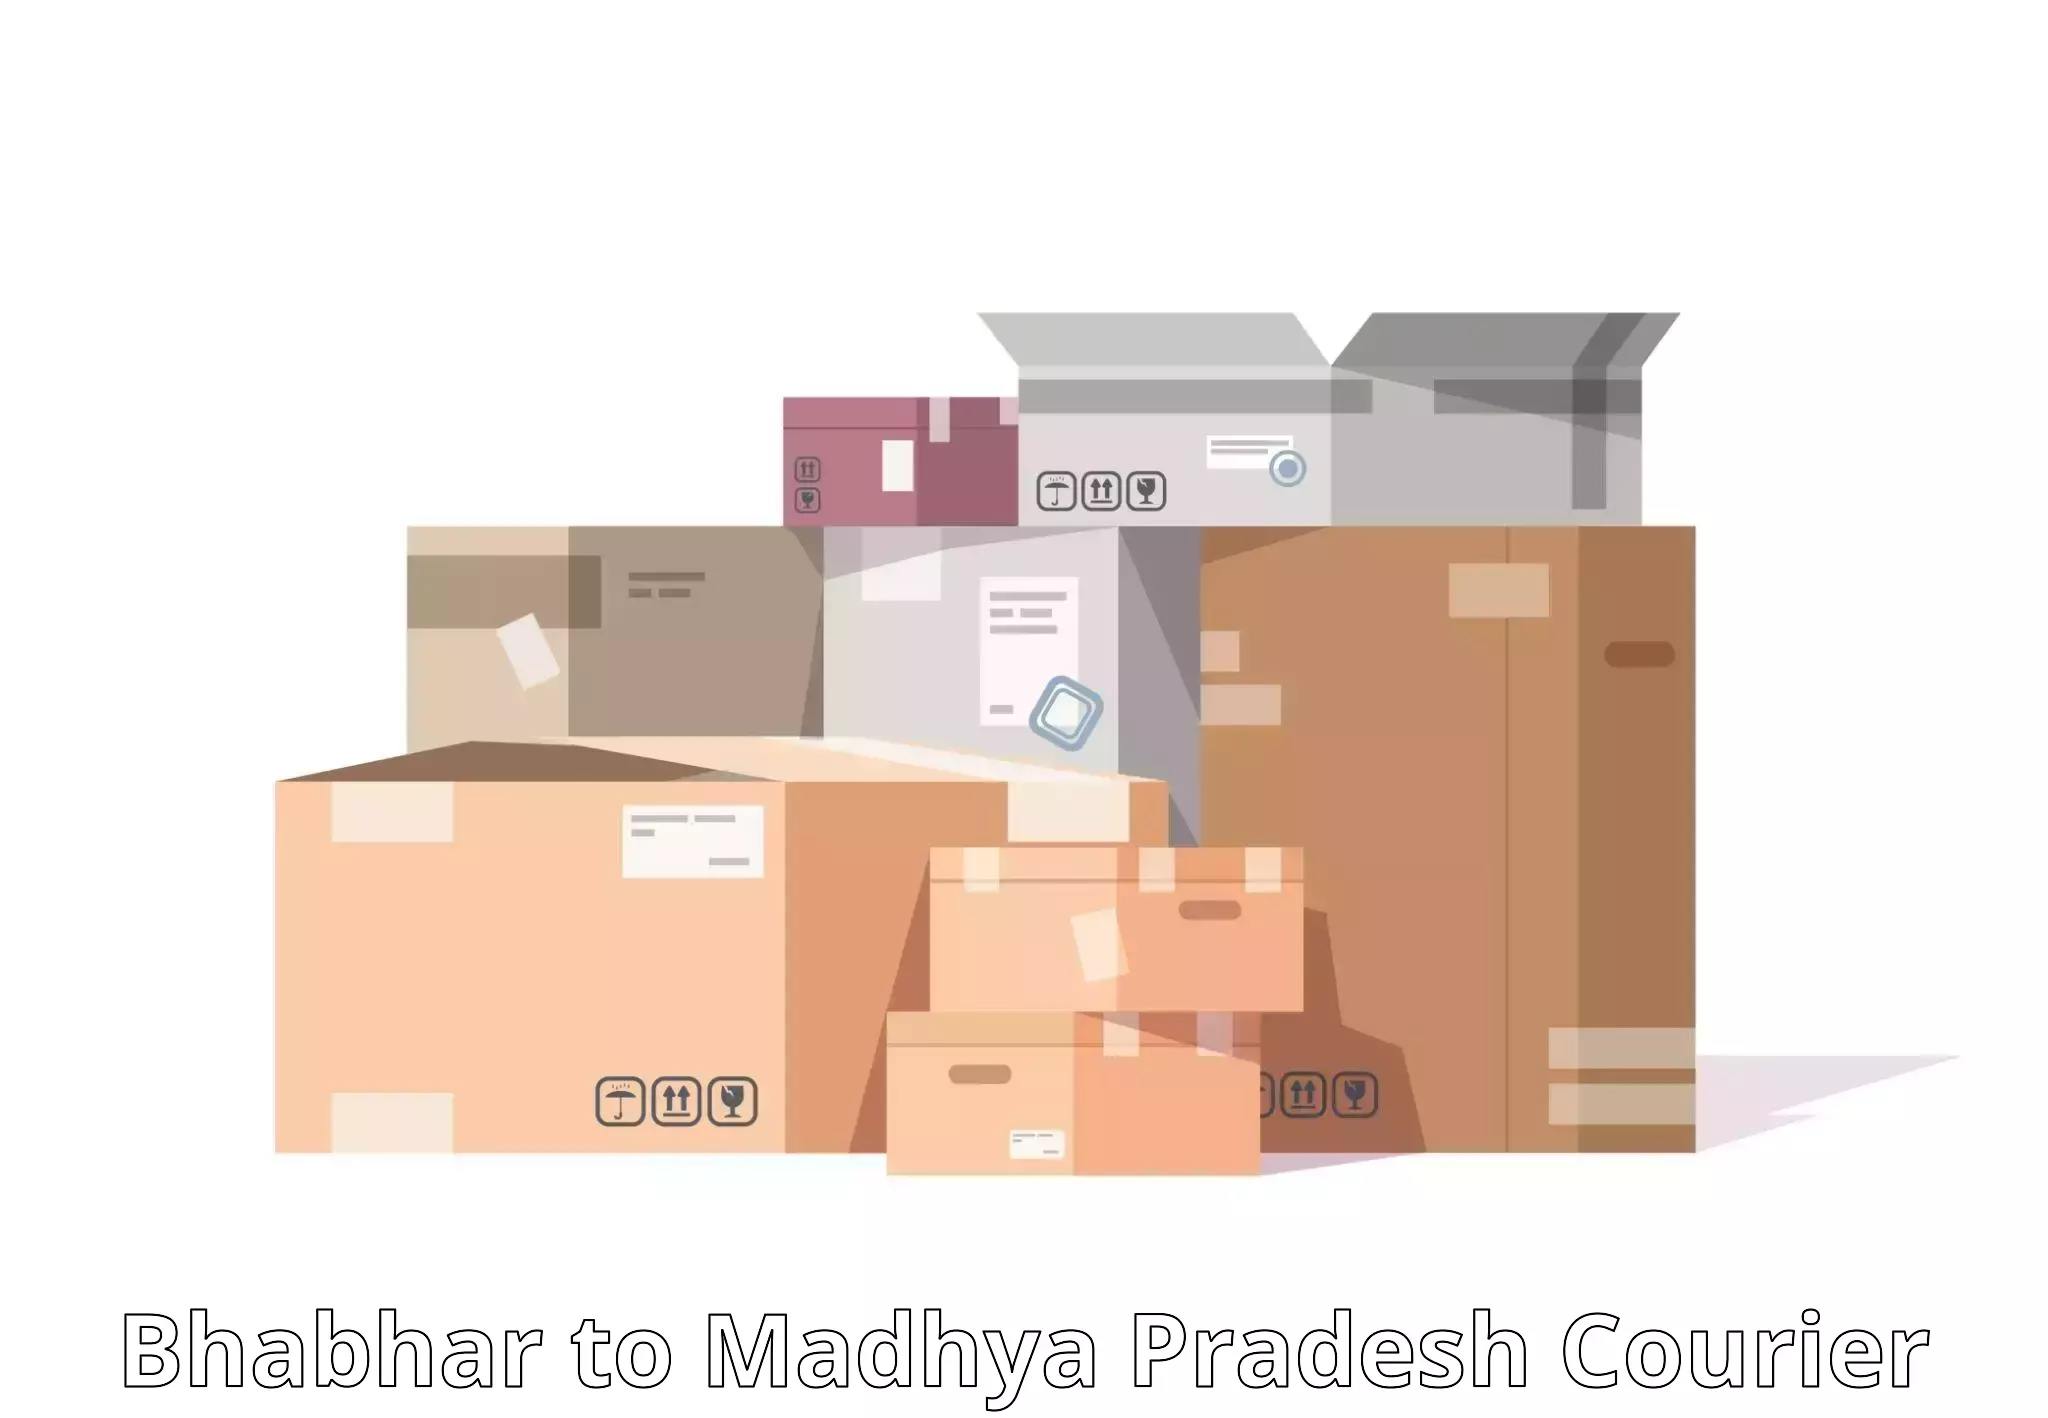 Package forwarding in Bhabhar to Madwas